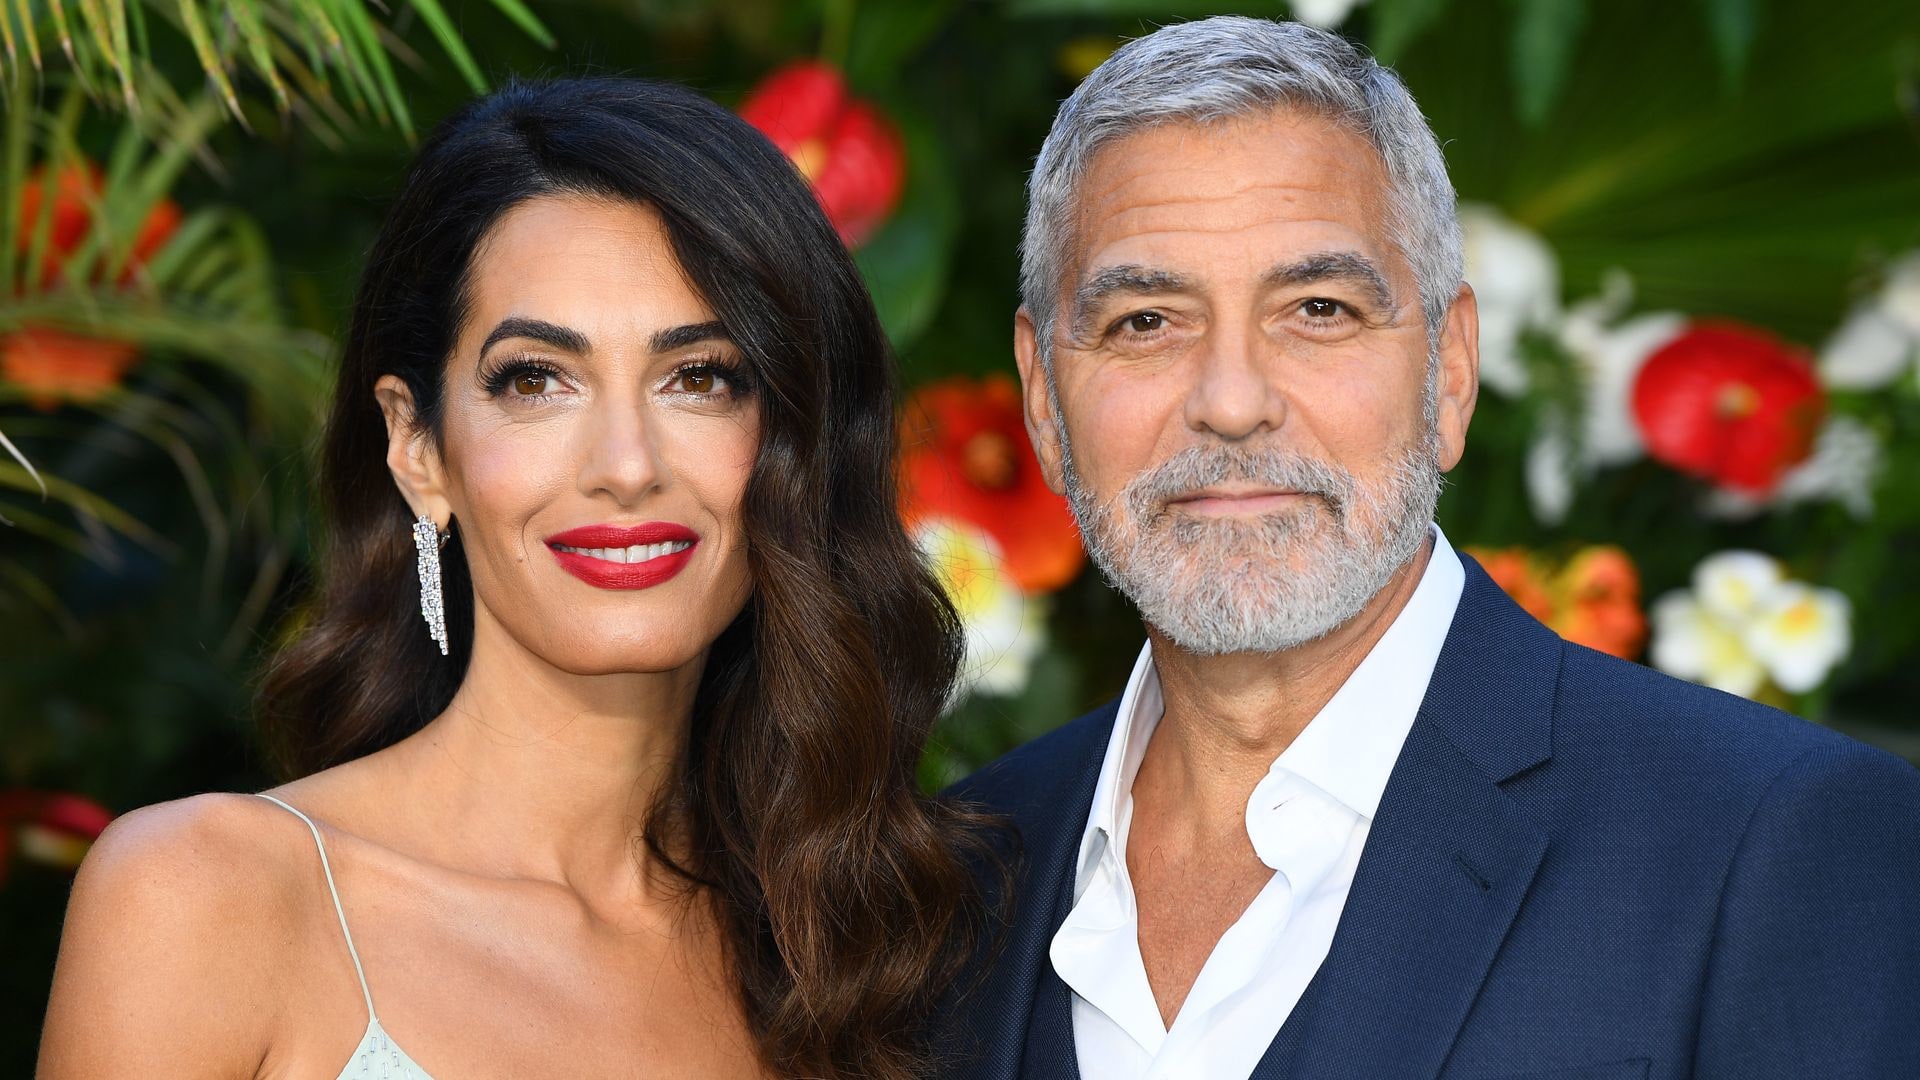 George and Amal Clooney against leafy backdrop